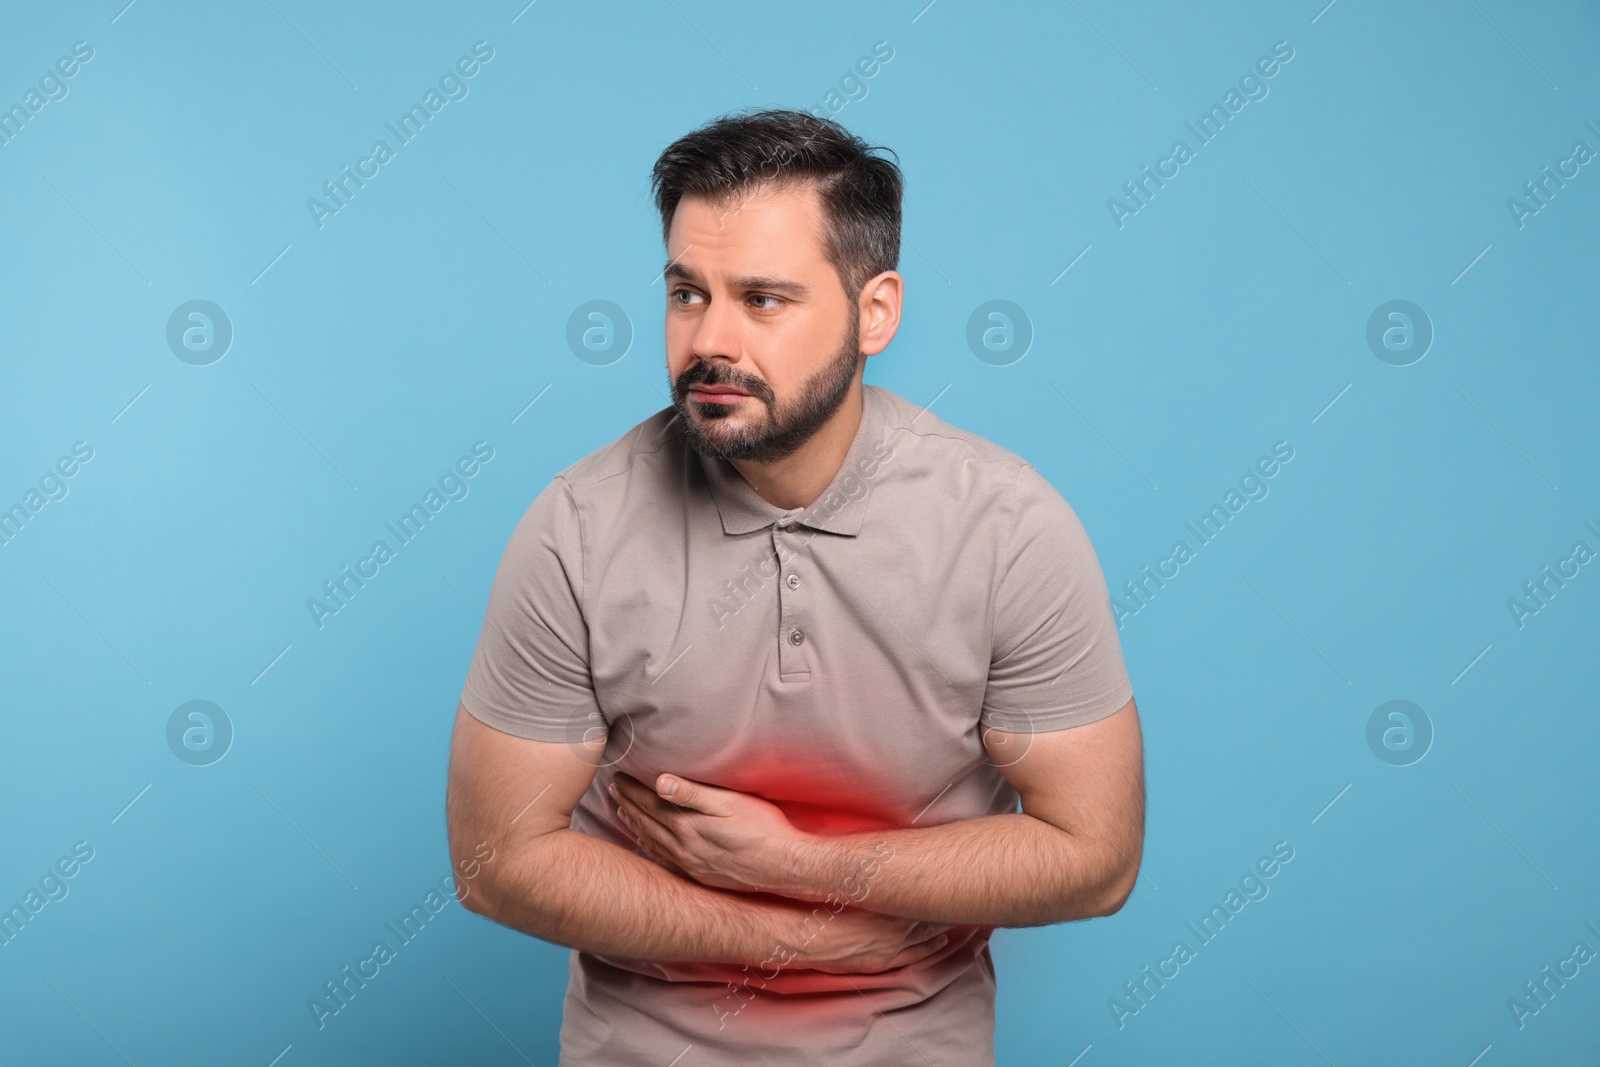 Image of Man suffering from abdominal pain on light blue background